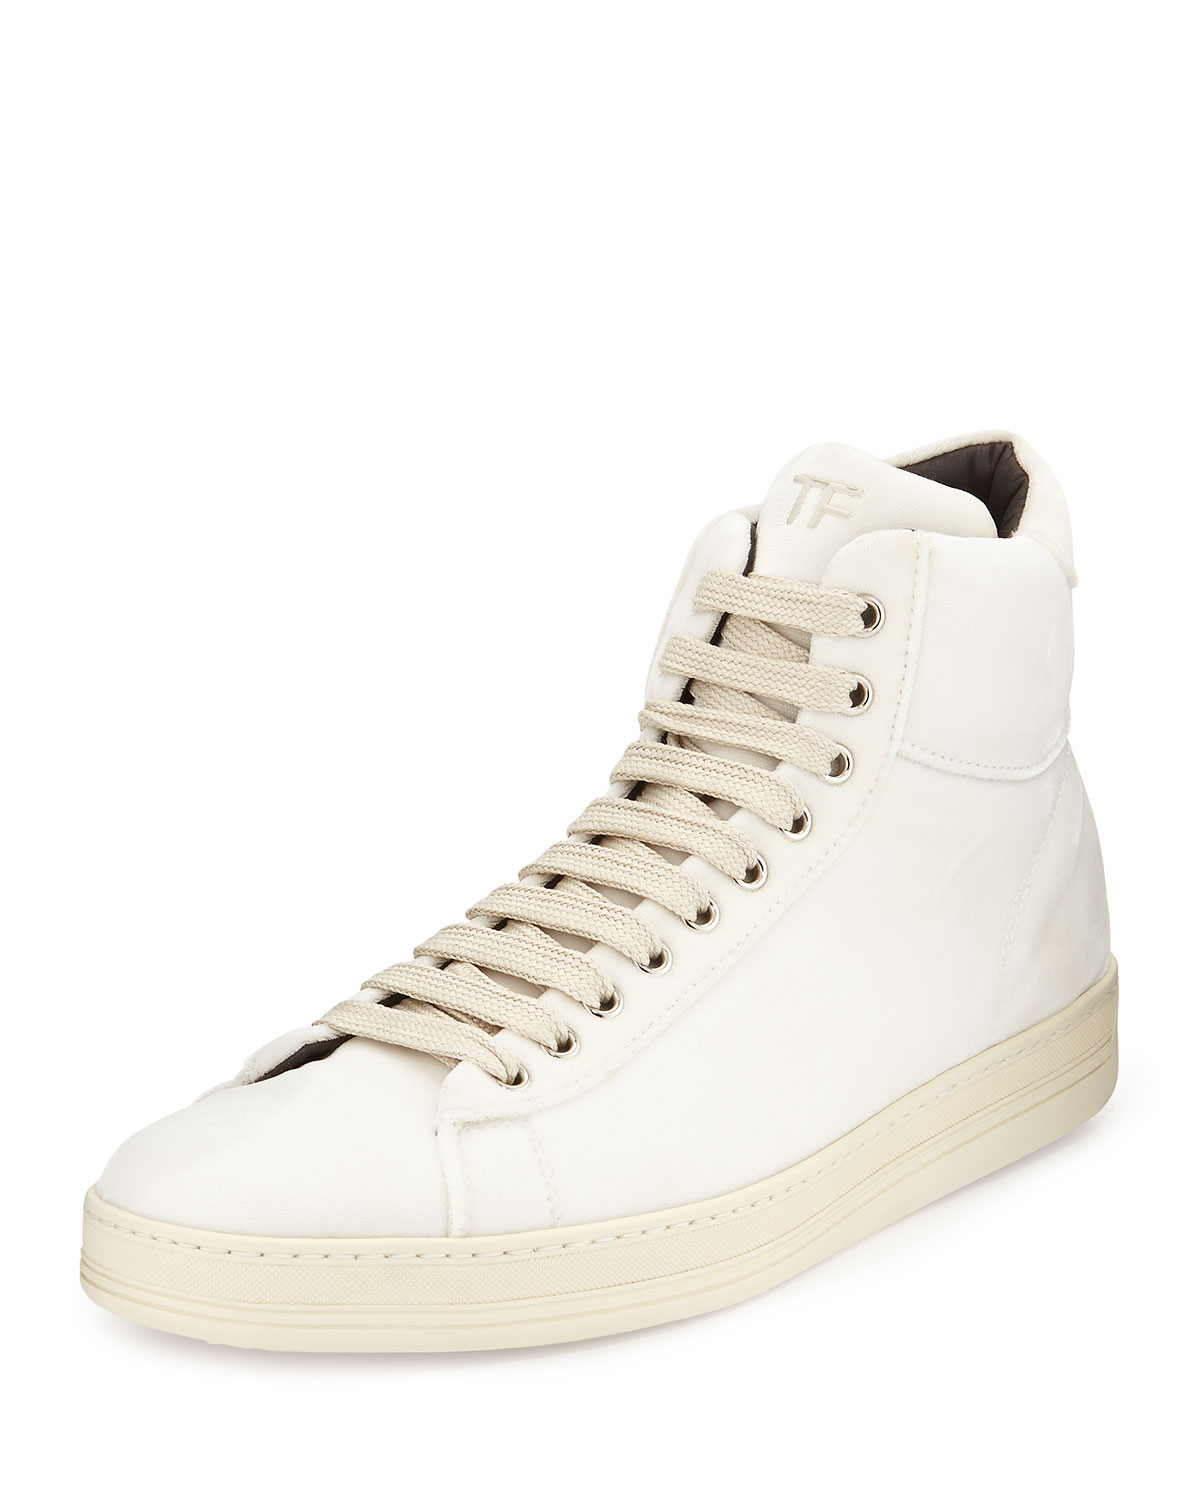 tom ford high tops